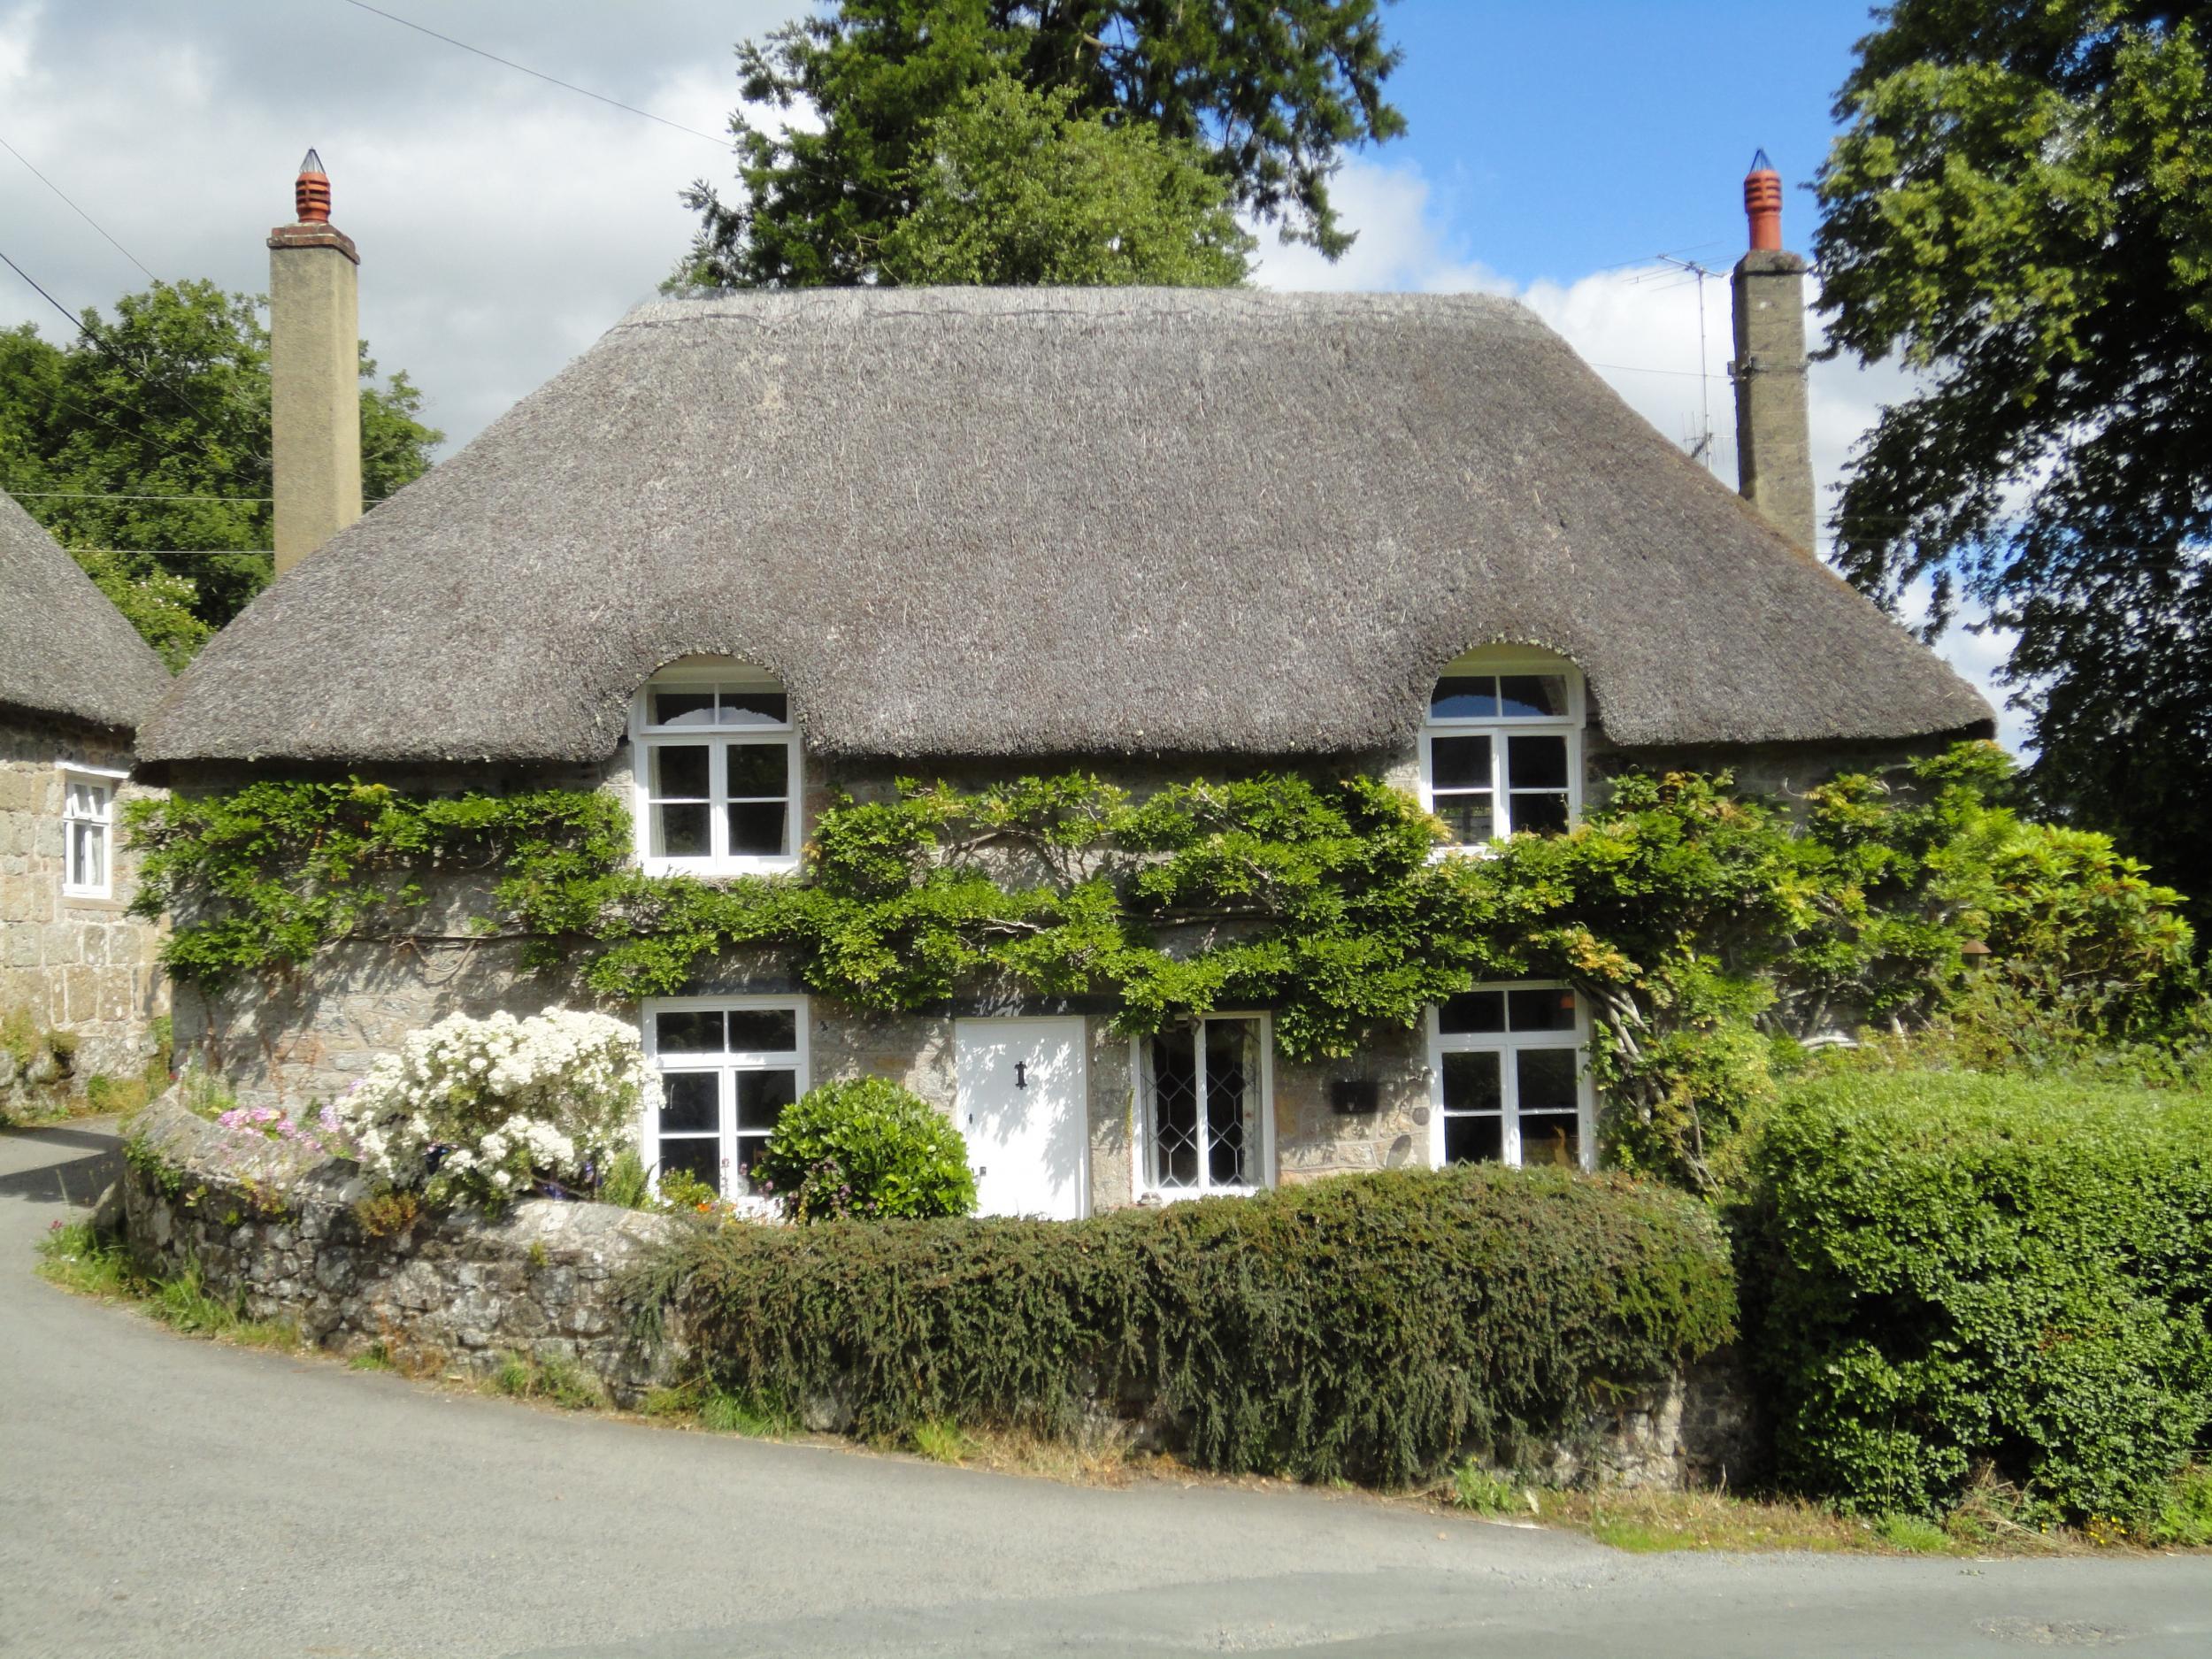 Thorn Cottage is tucked away in a quiet hamlet